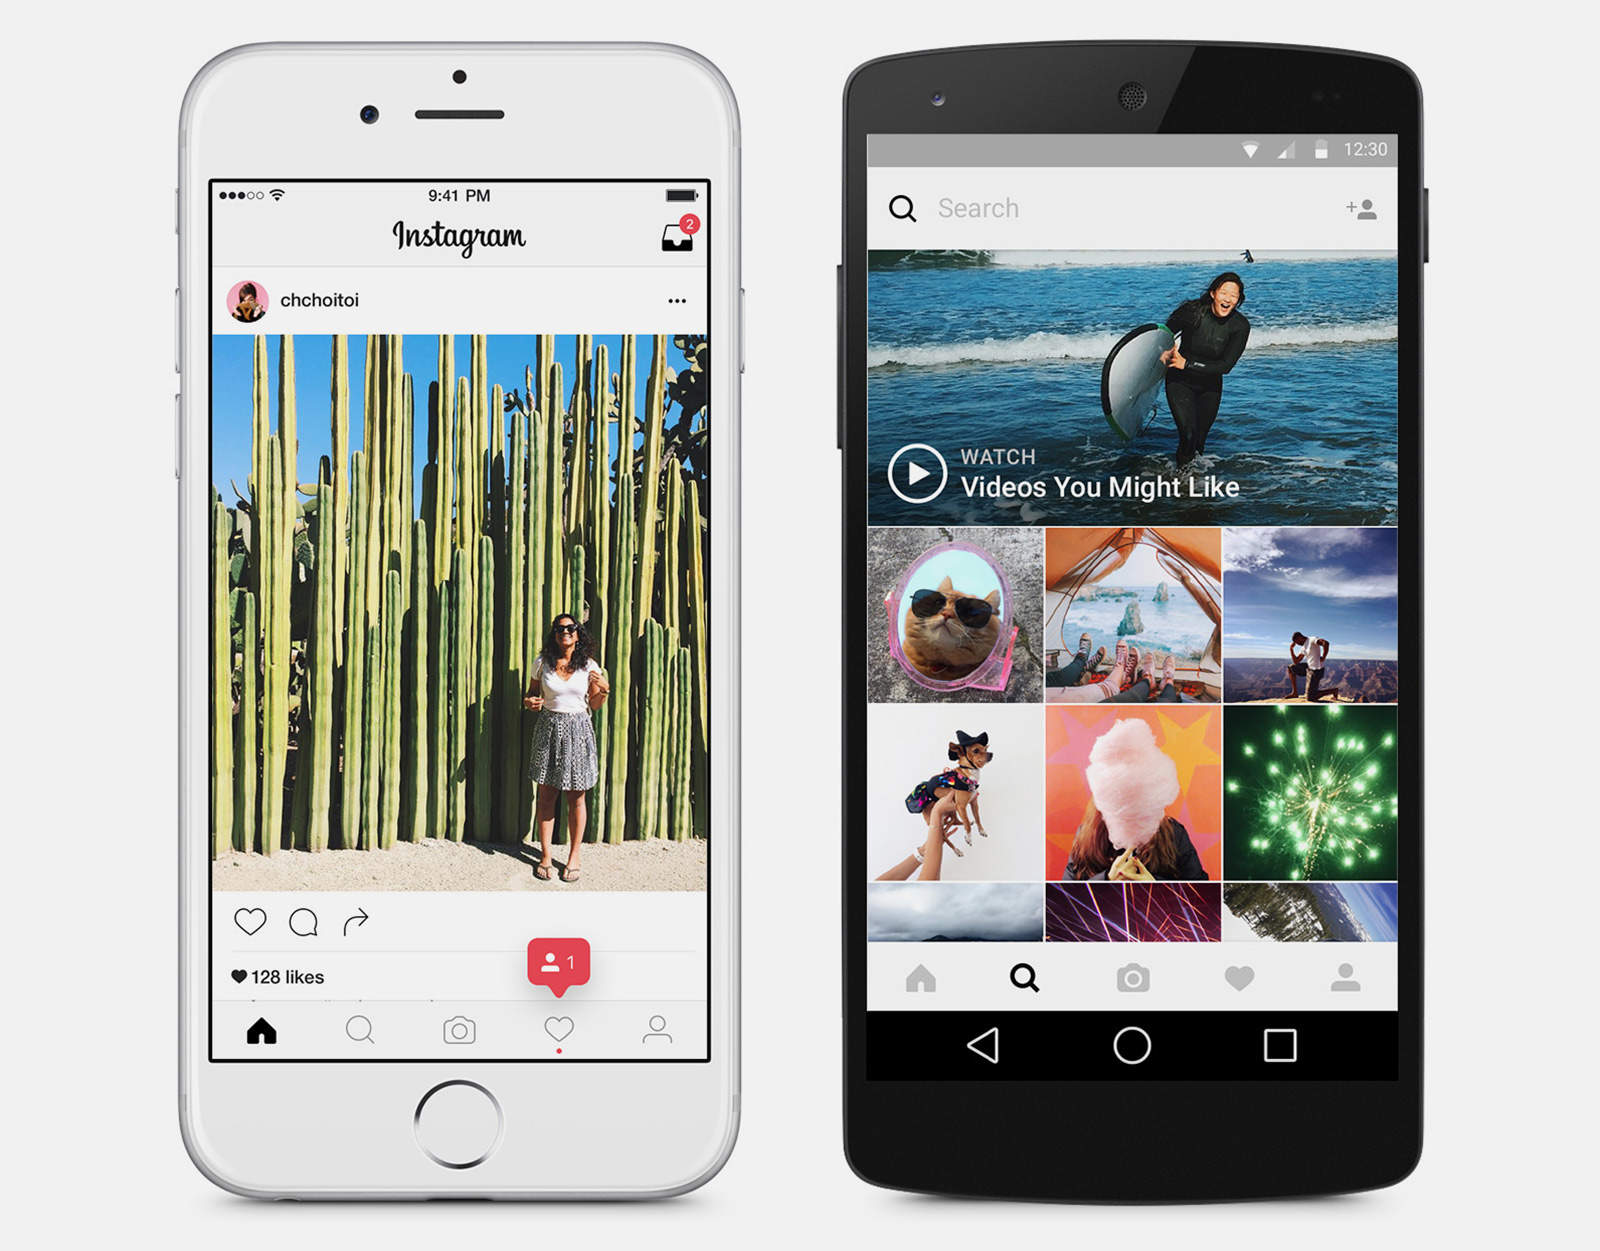 Instagram now has more than 600 million users.